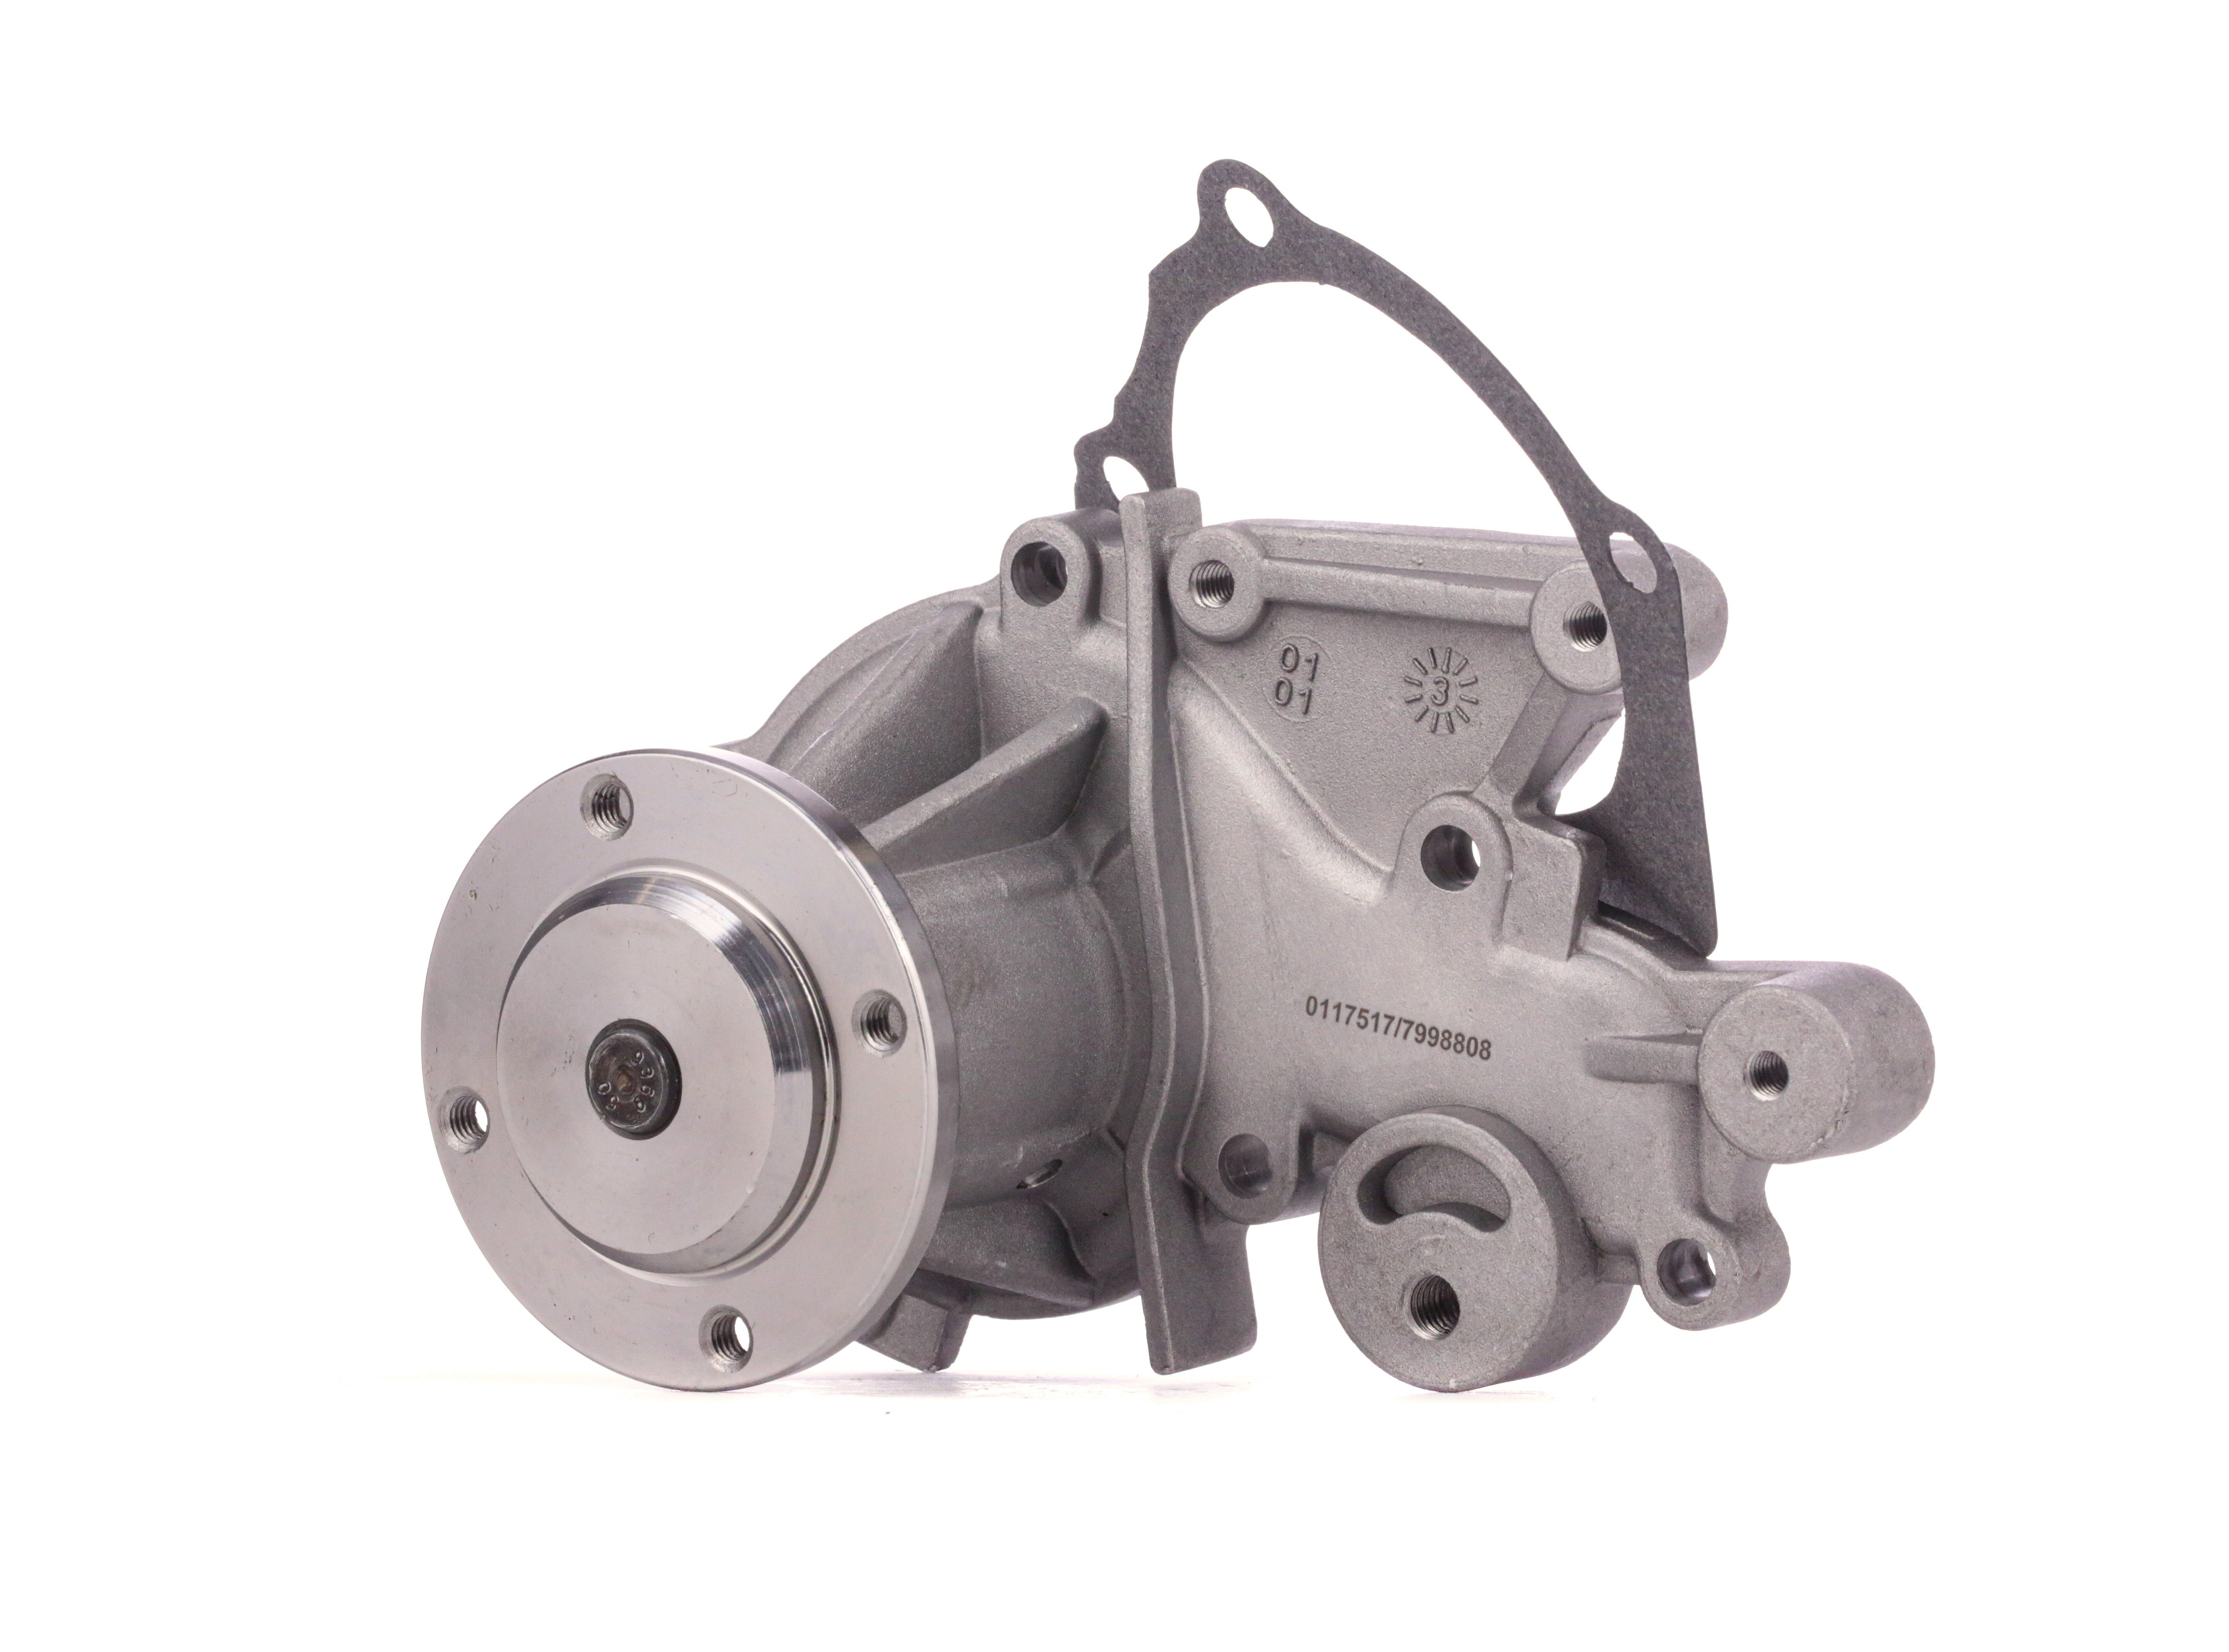 STARK SKWP-0520148 Water pump Cast Aluminium, without belt pulley, with seal, with flange, Mechanical, Metal impeller